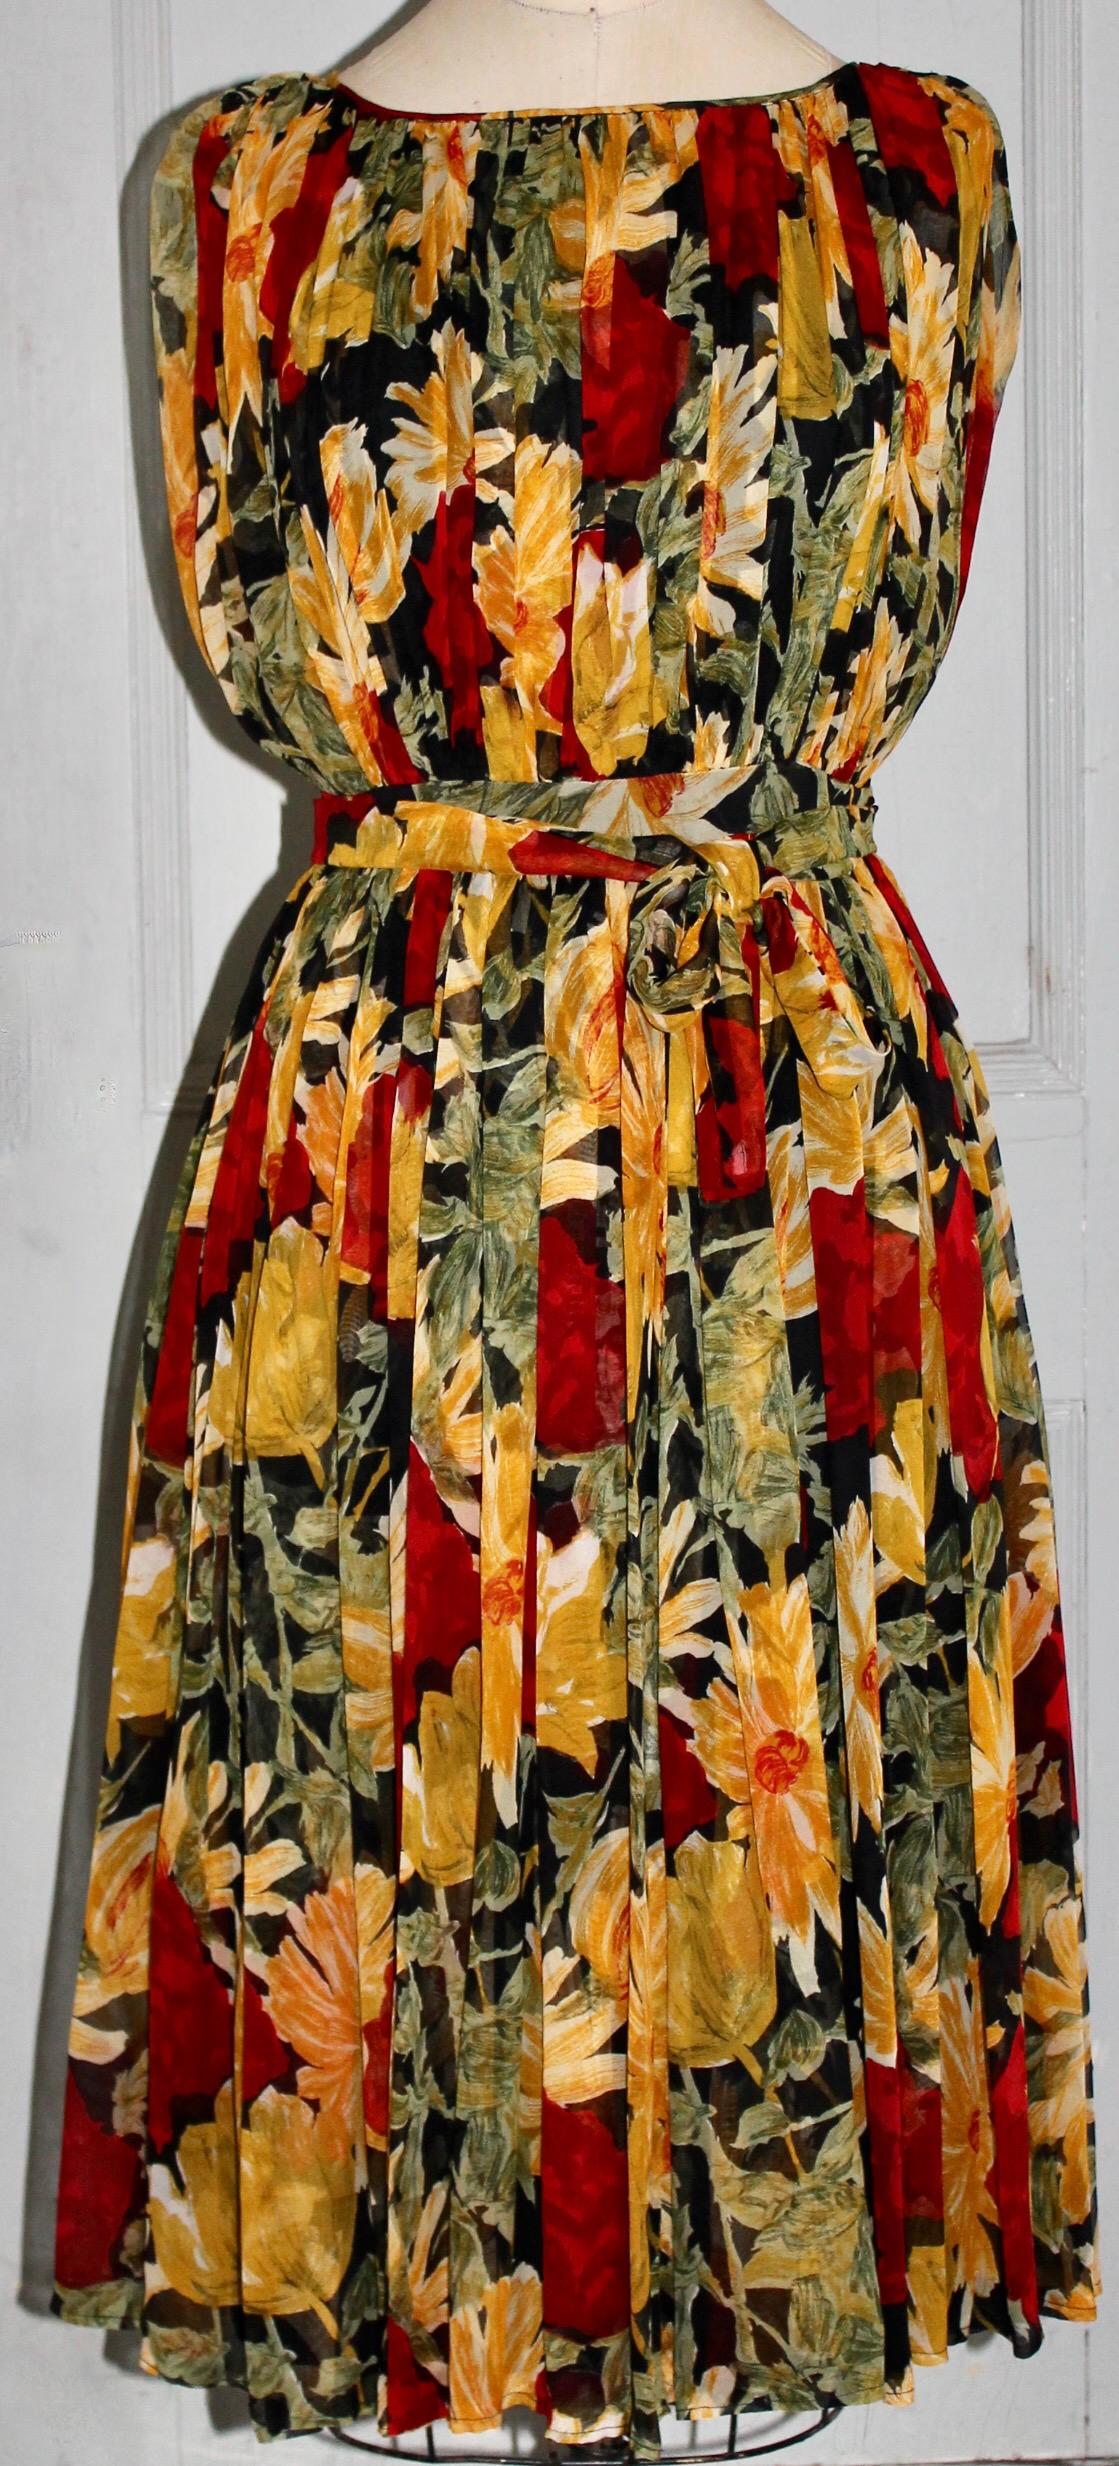 Offering a Floral Chiffon Dress by Townley (labeled), the design attributed to
Claire McCardell.  Approximate size: 8, length 43